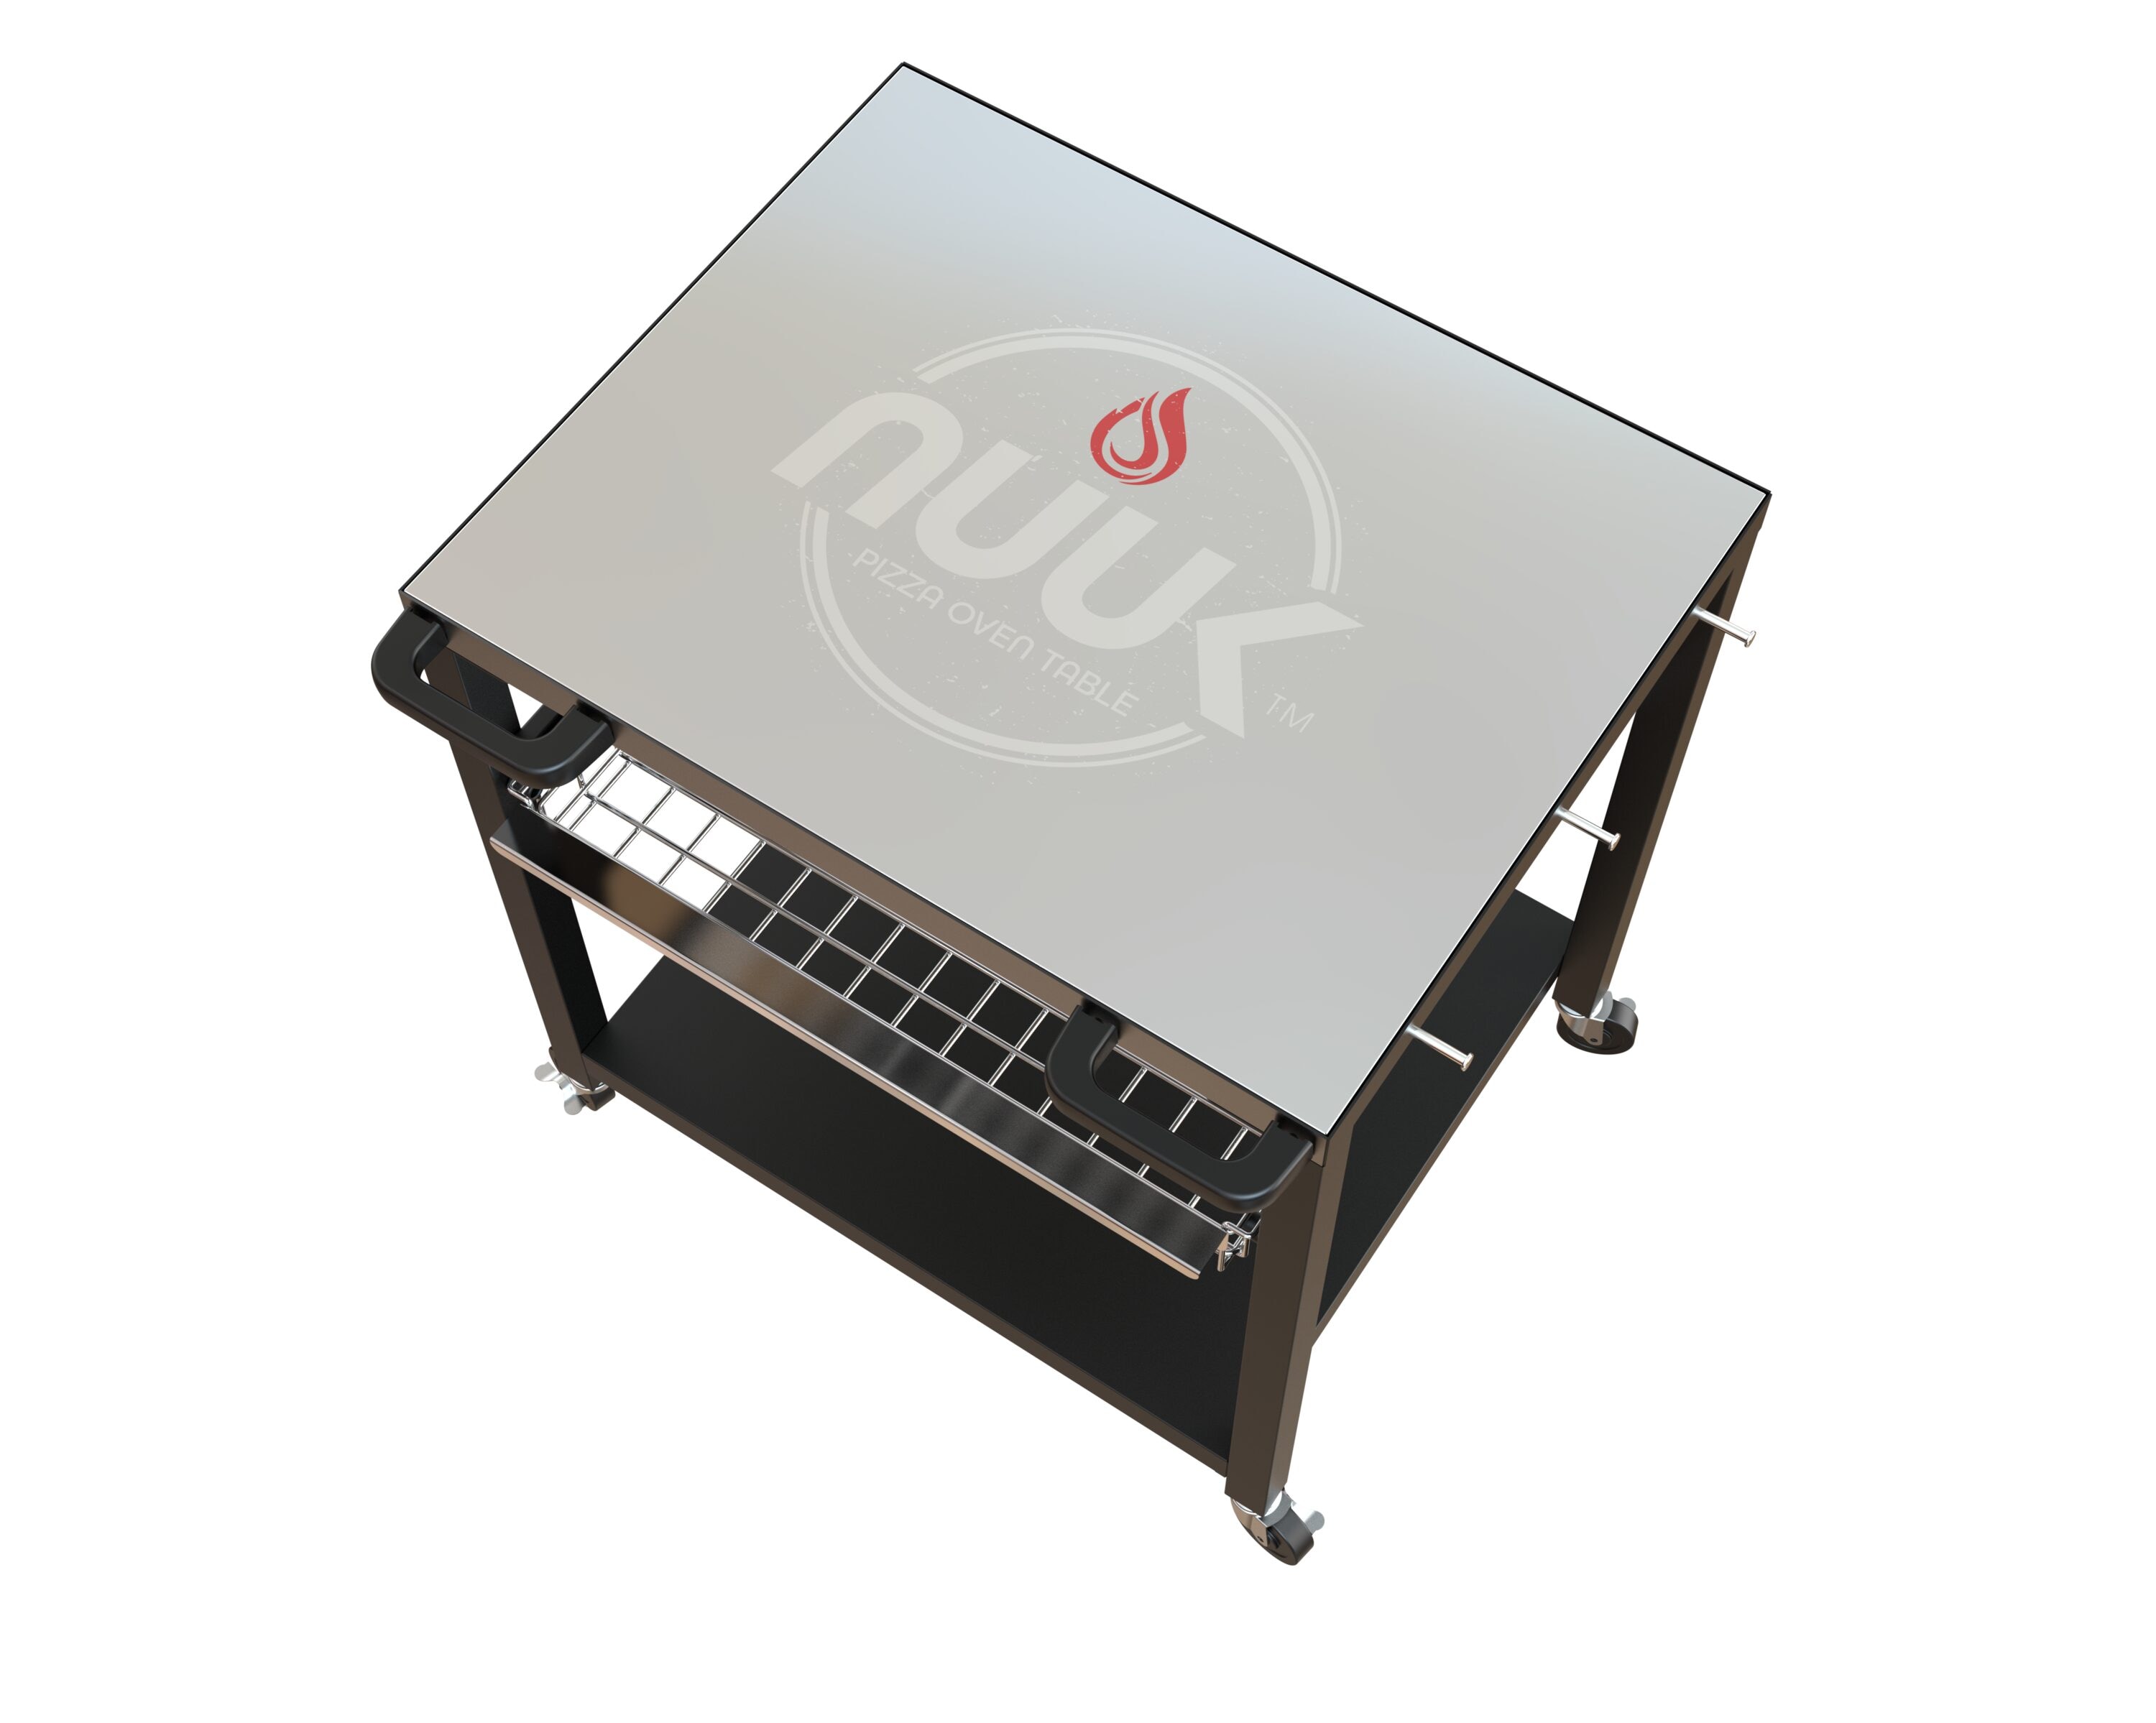 NUUK & in USA Stands Grill Grilling NUUK at Steel the Carts Grill Cart Grill department Tables